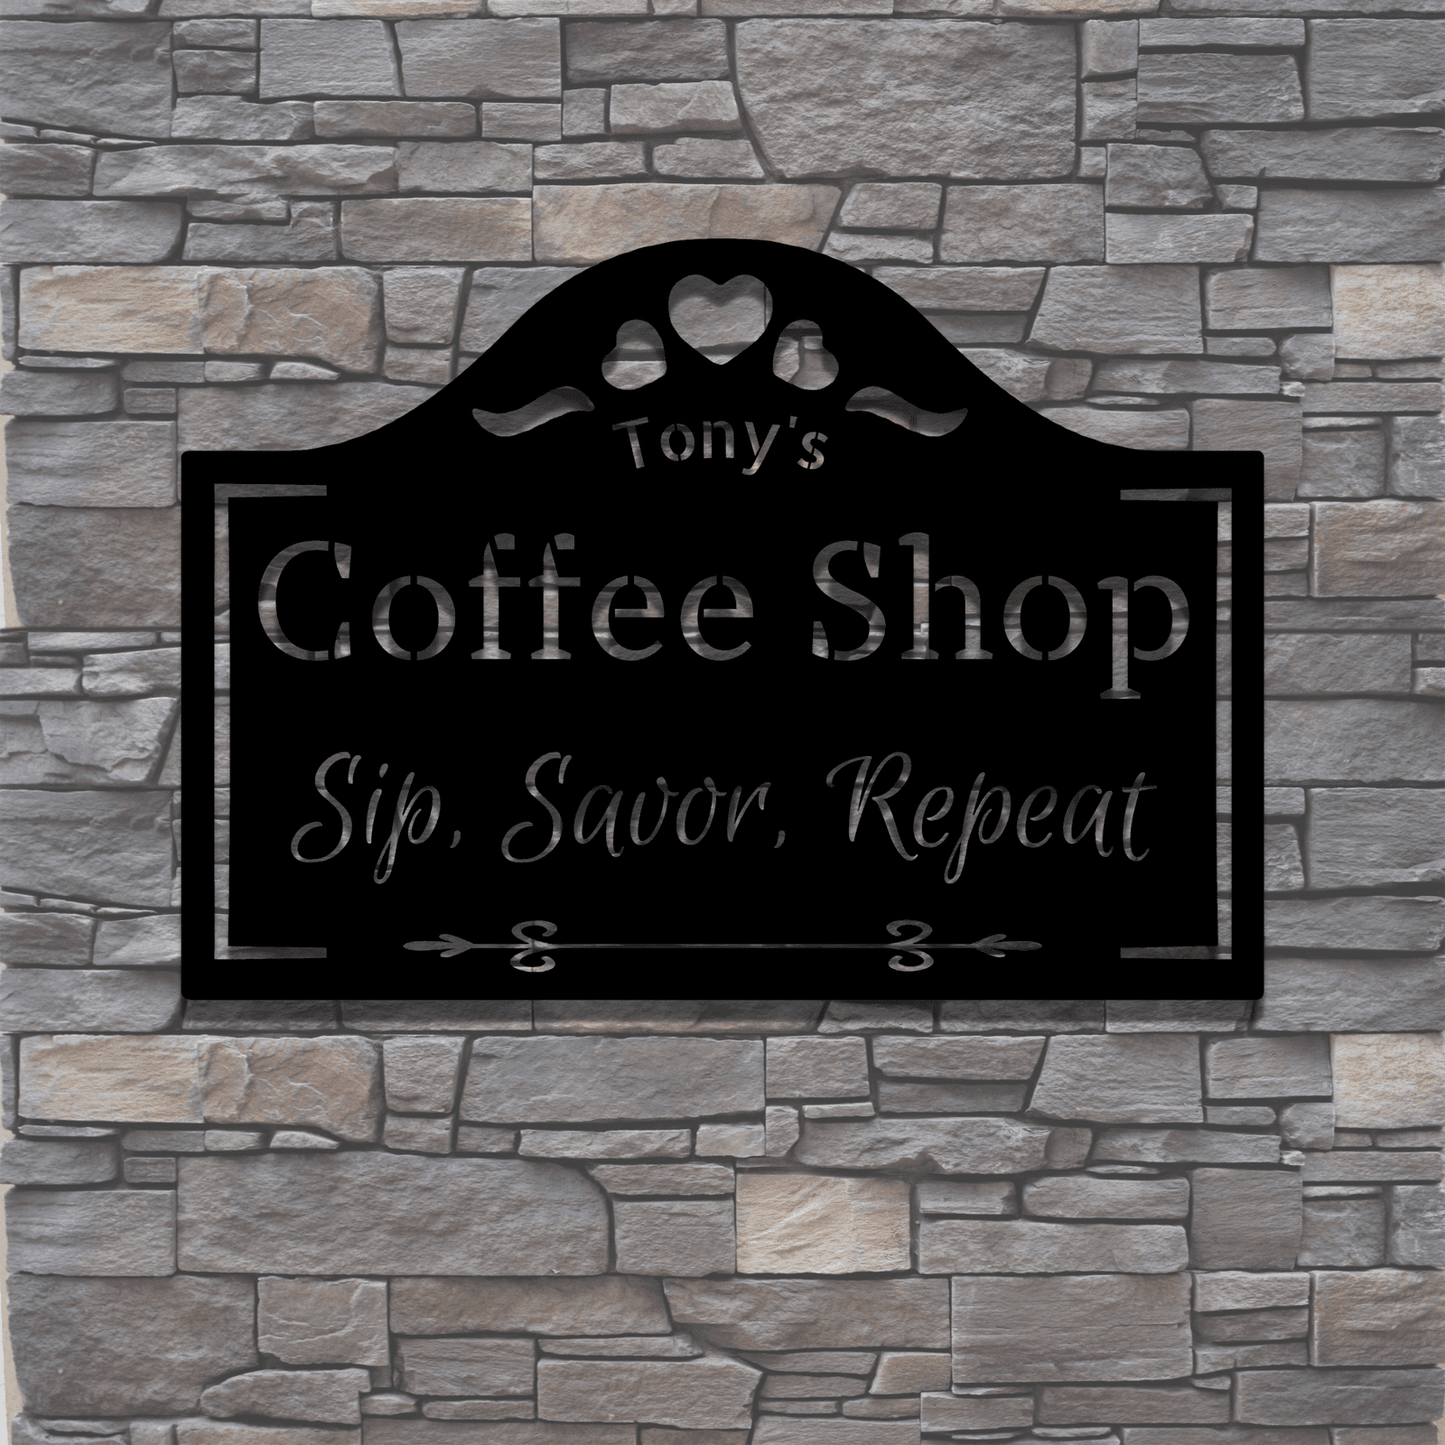 Personalized Crested Plaque